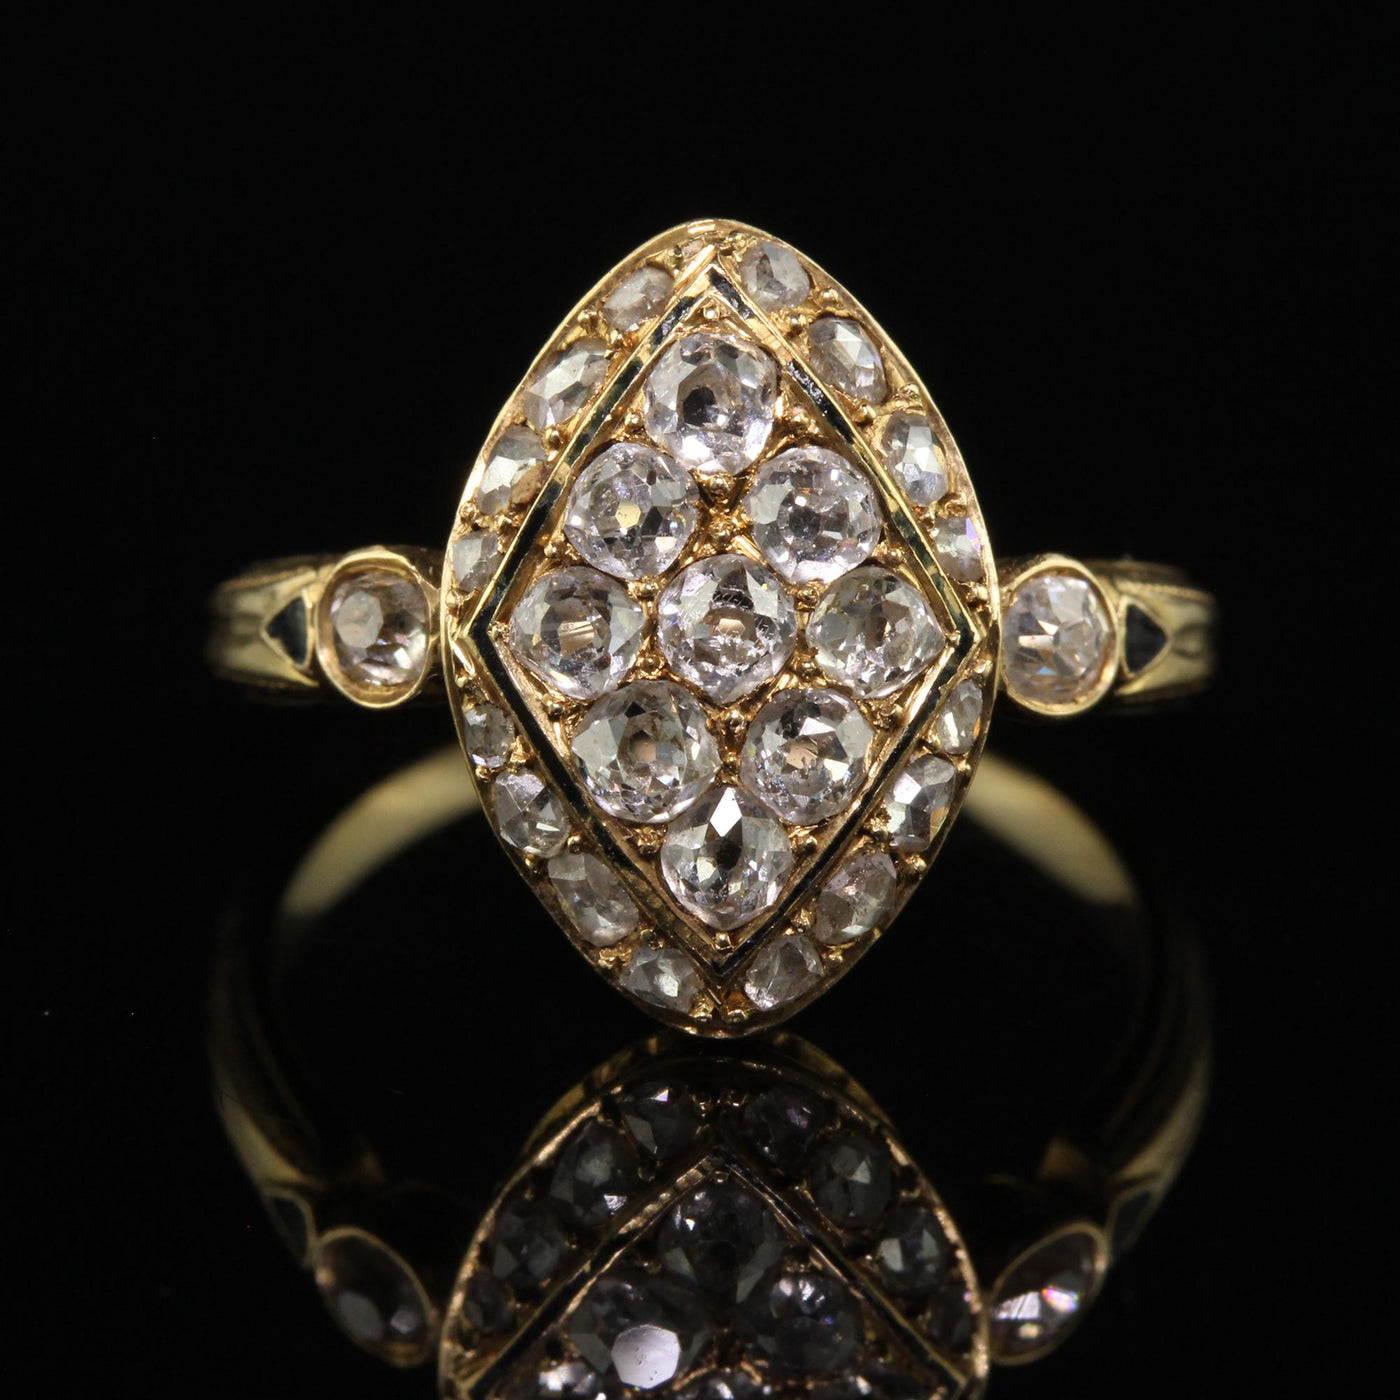 Antique Victorian 18K Yellow Gold French Old Cut Diamond Enamel Navette Ring